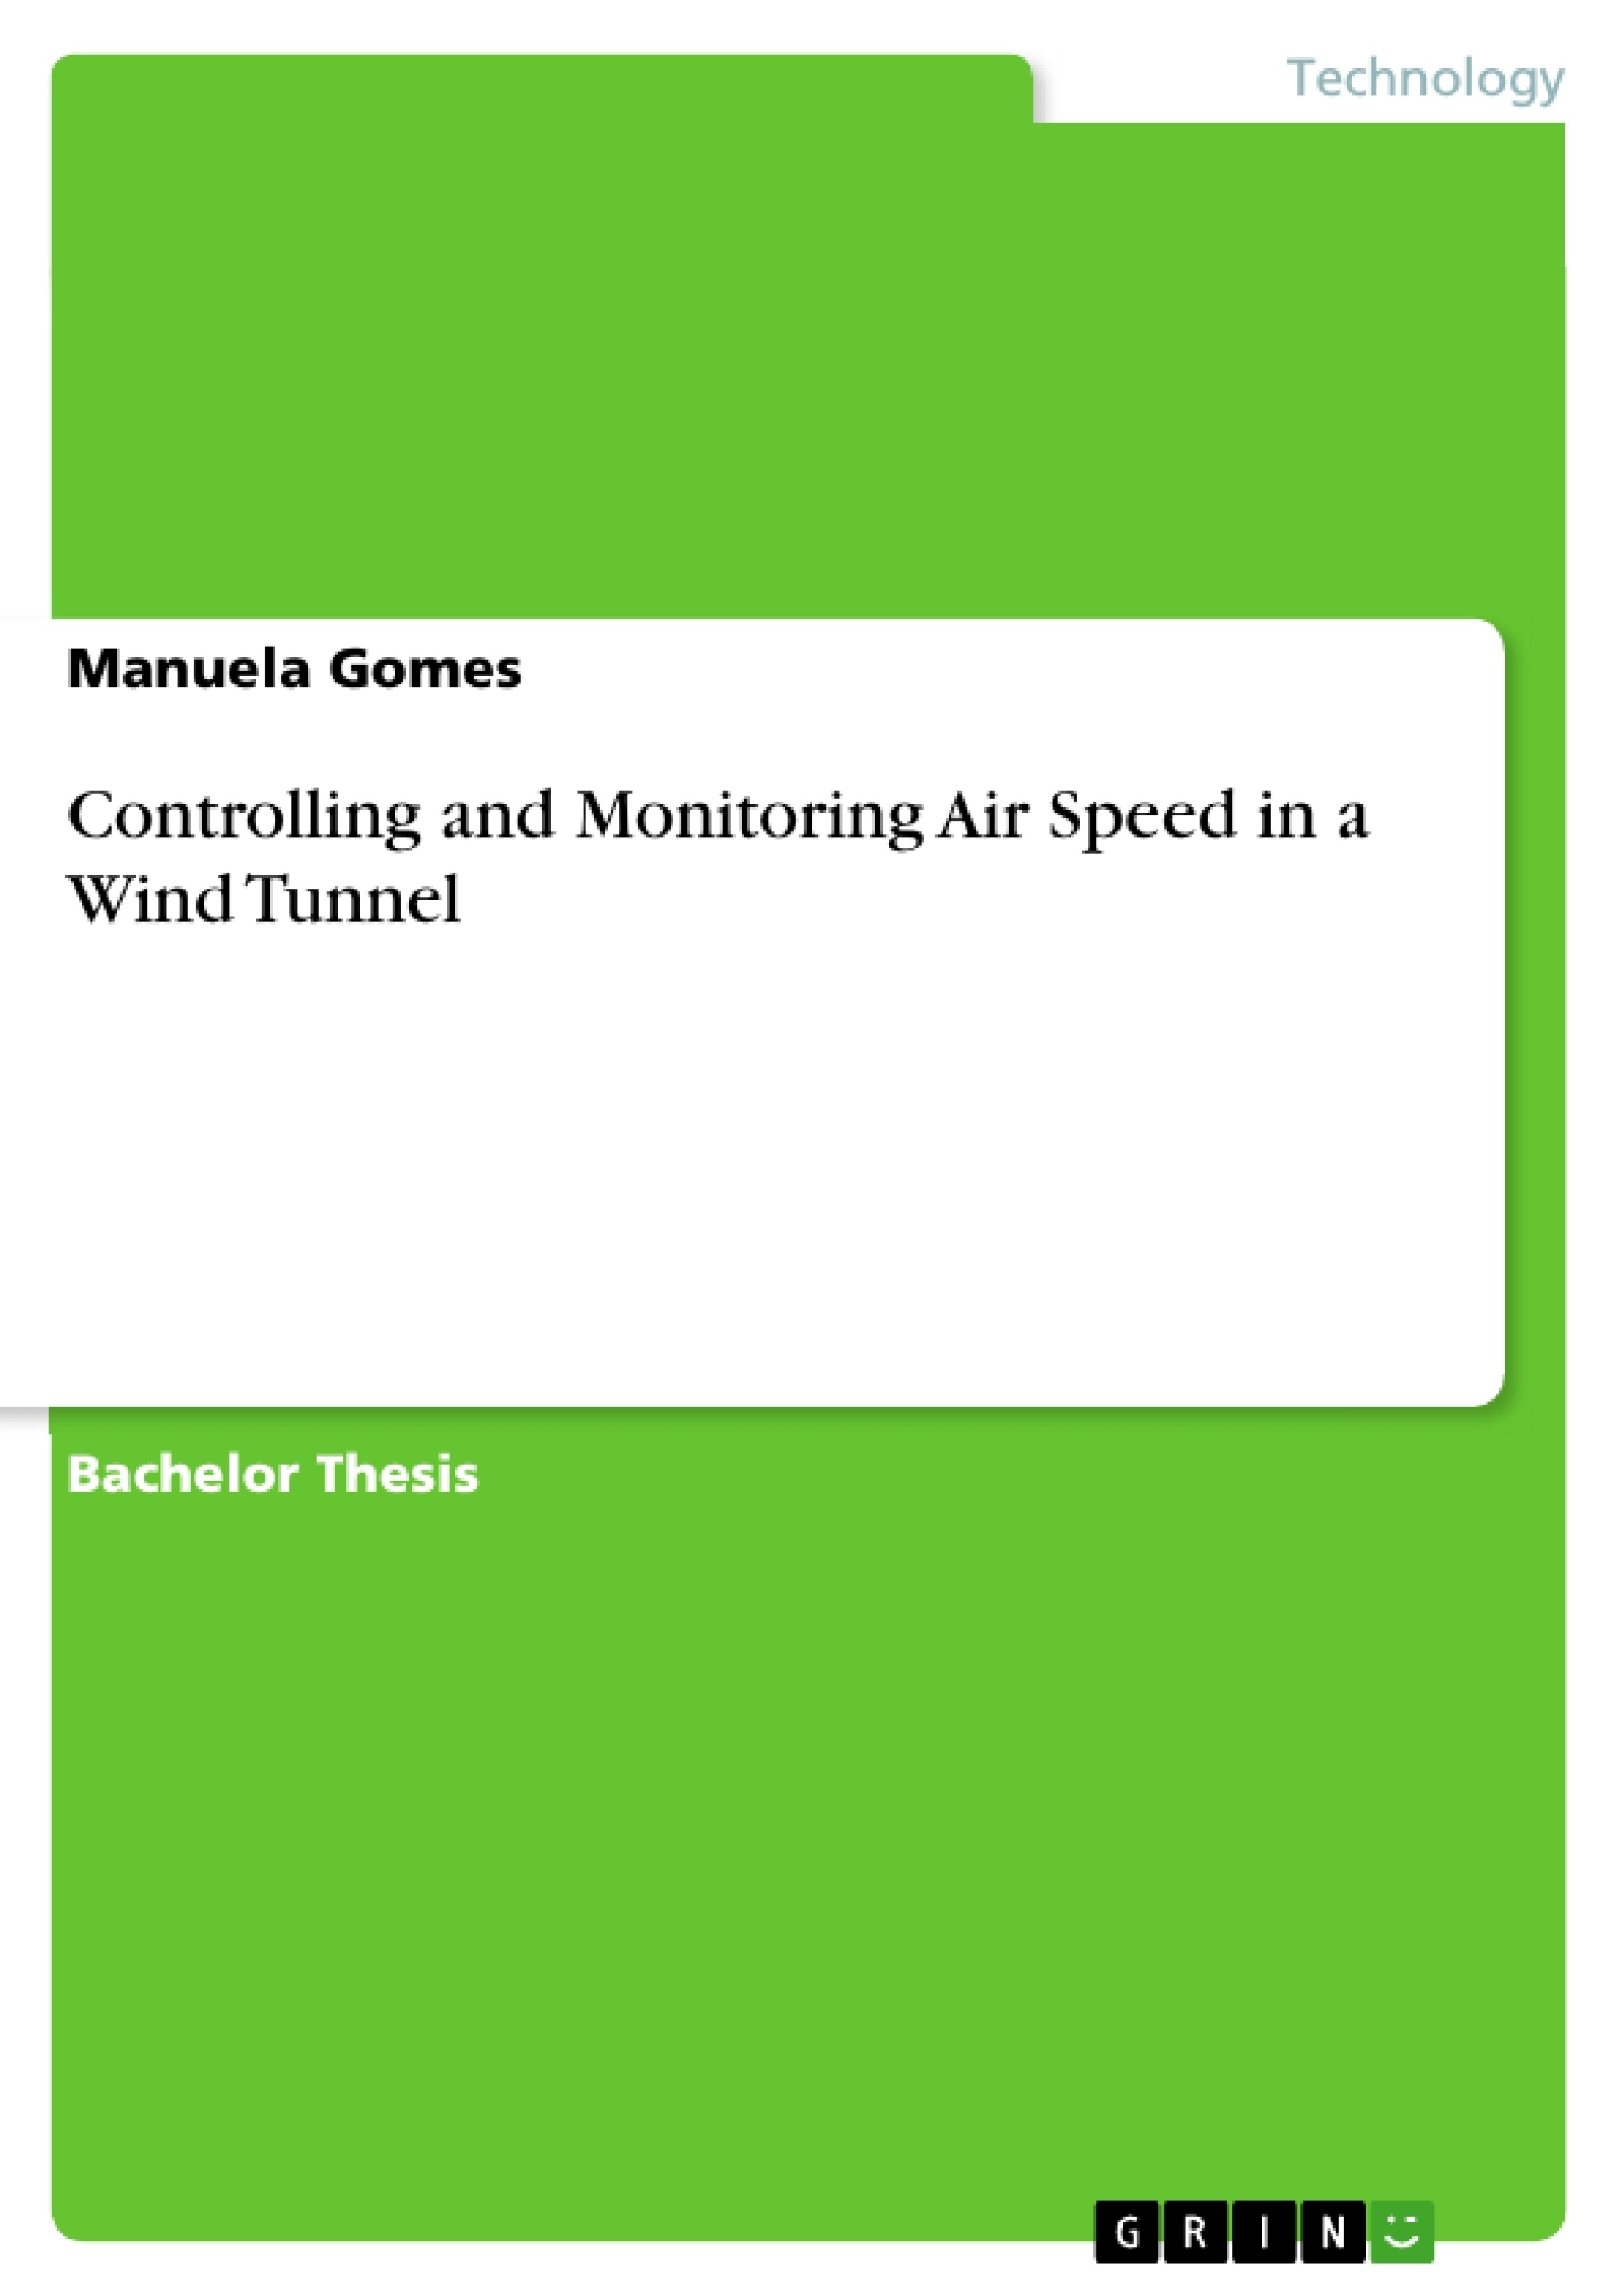 Title: Controlling and Monitoring Air Speed in a Wind Tunnel